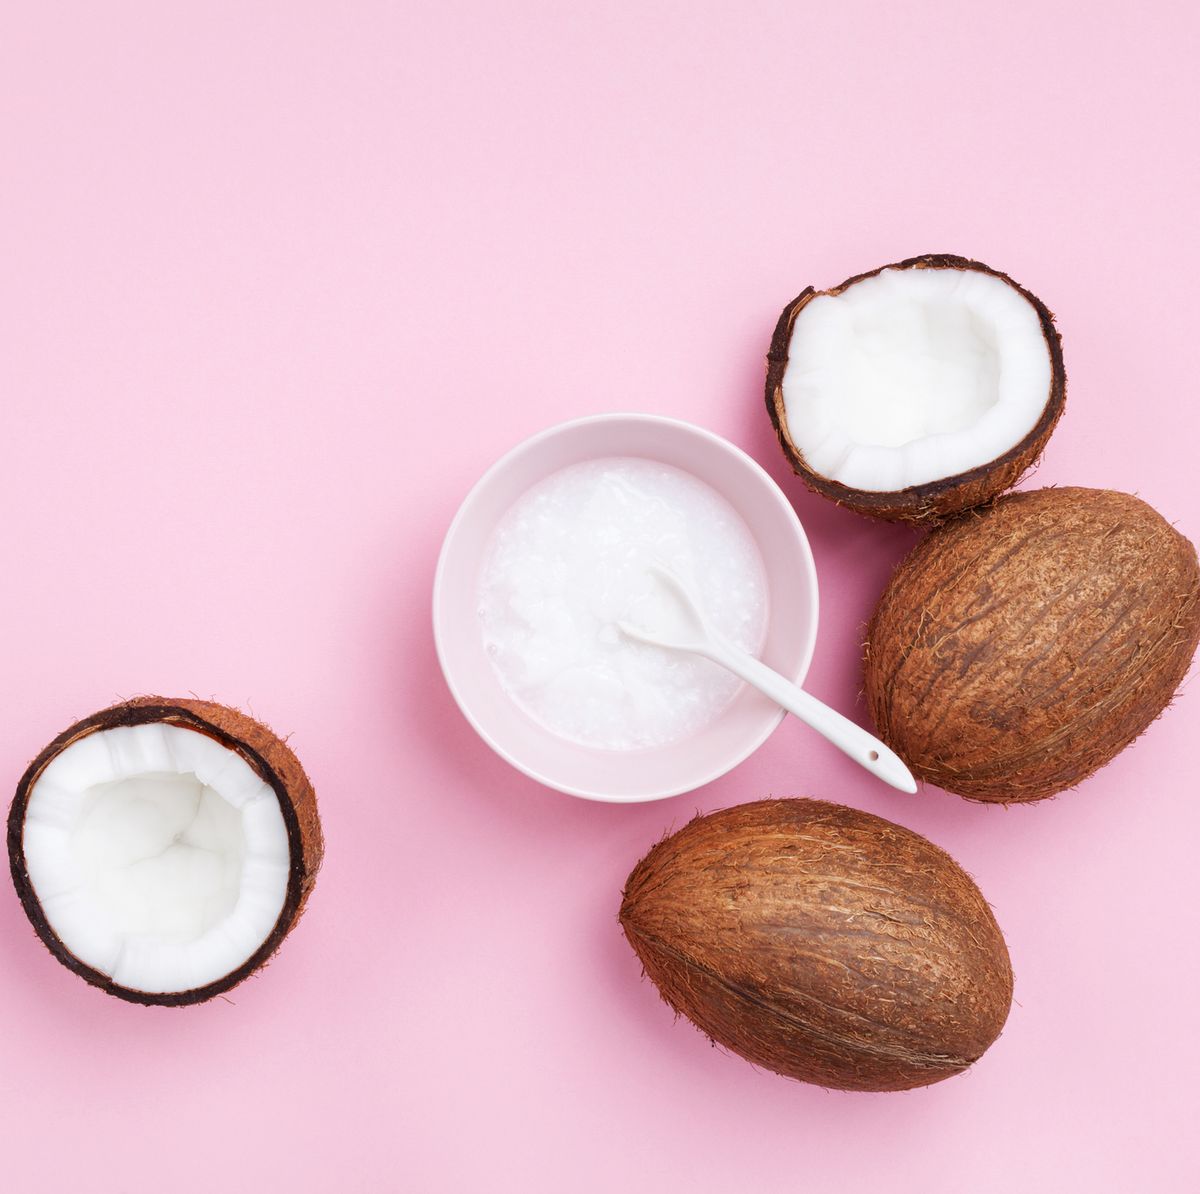 25 Best Coconut Oil Uses - How to Use Coconut Oil for Skin & Hair